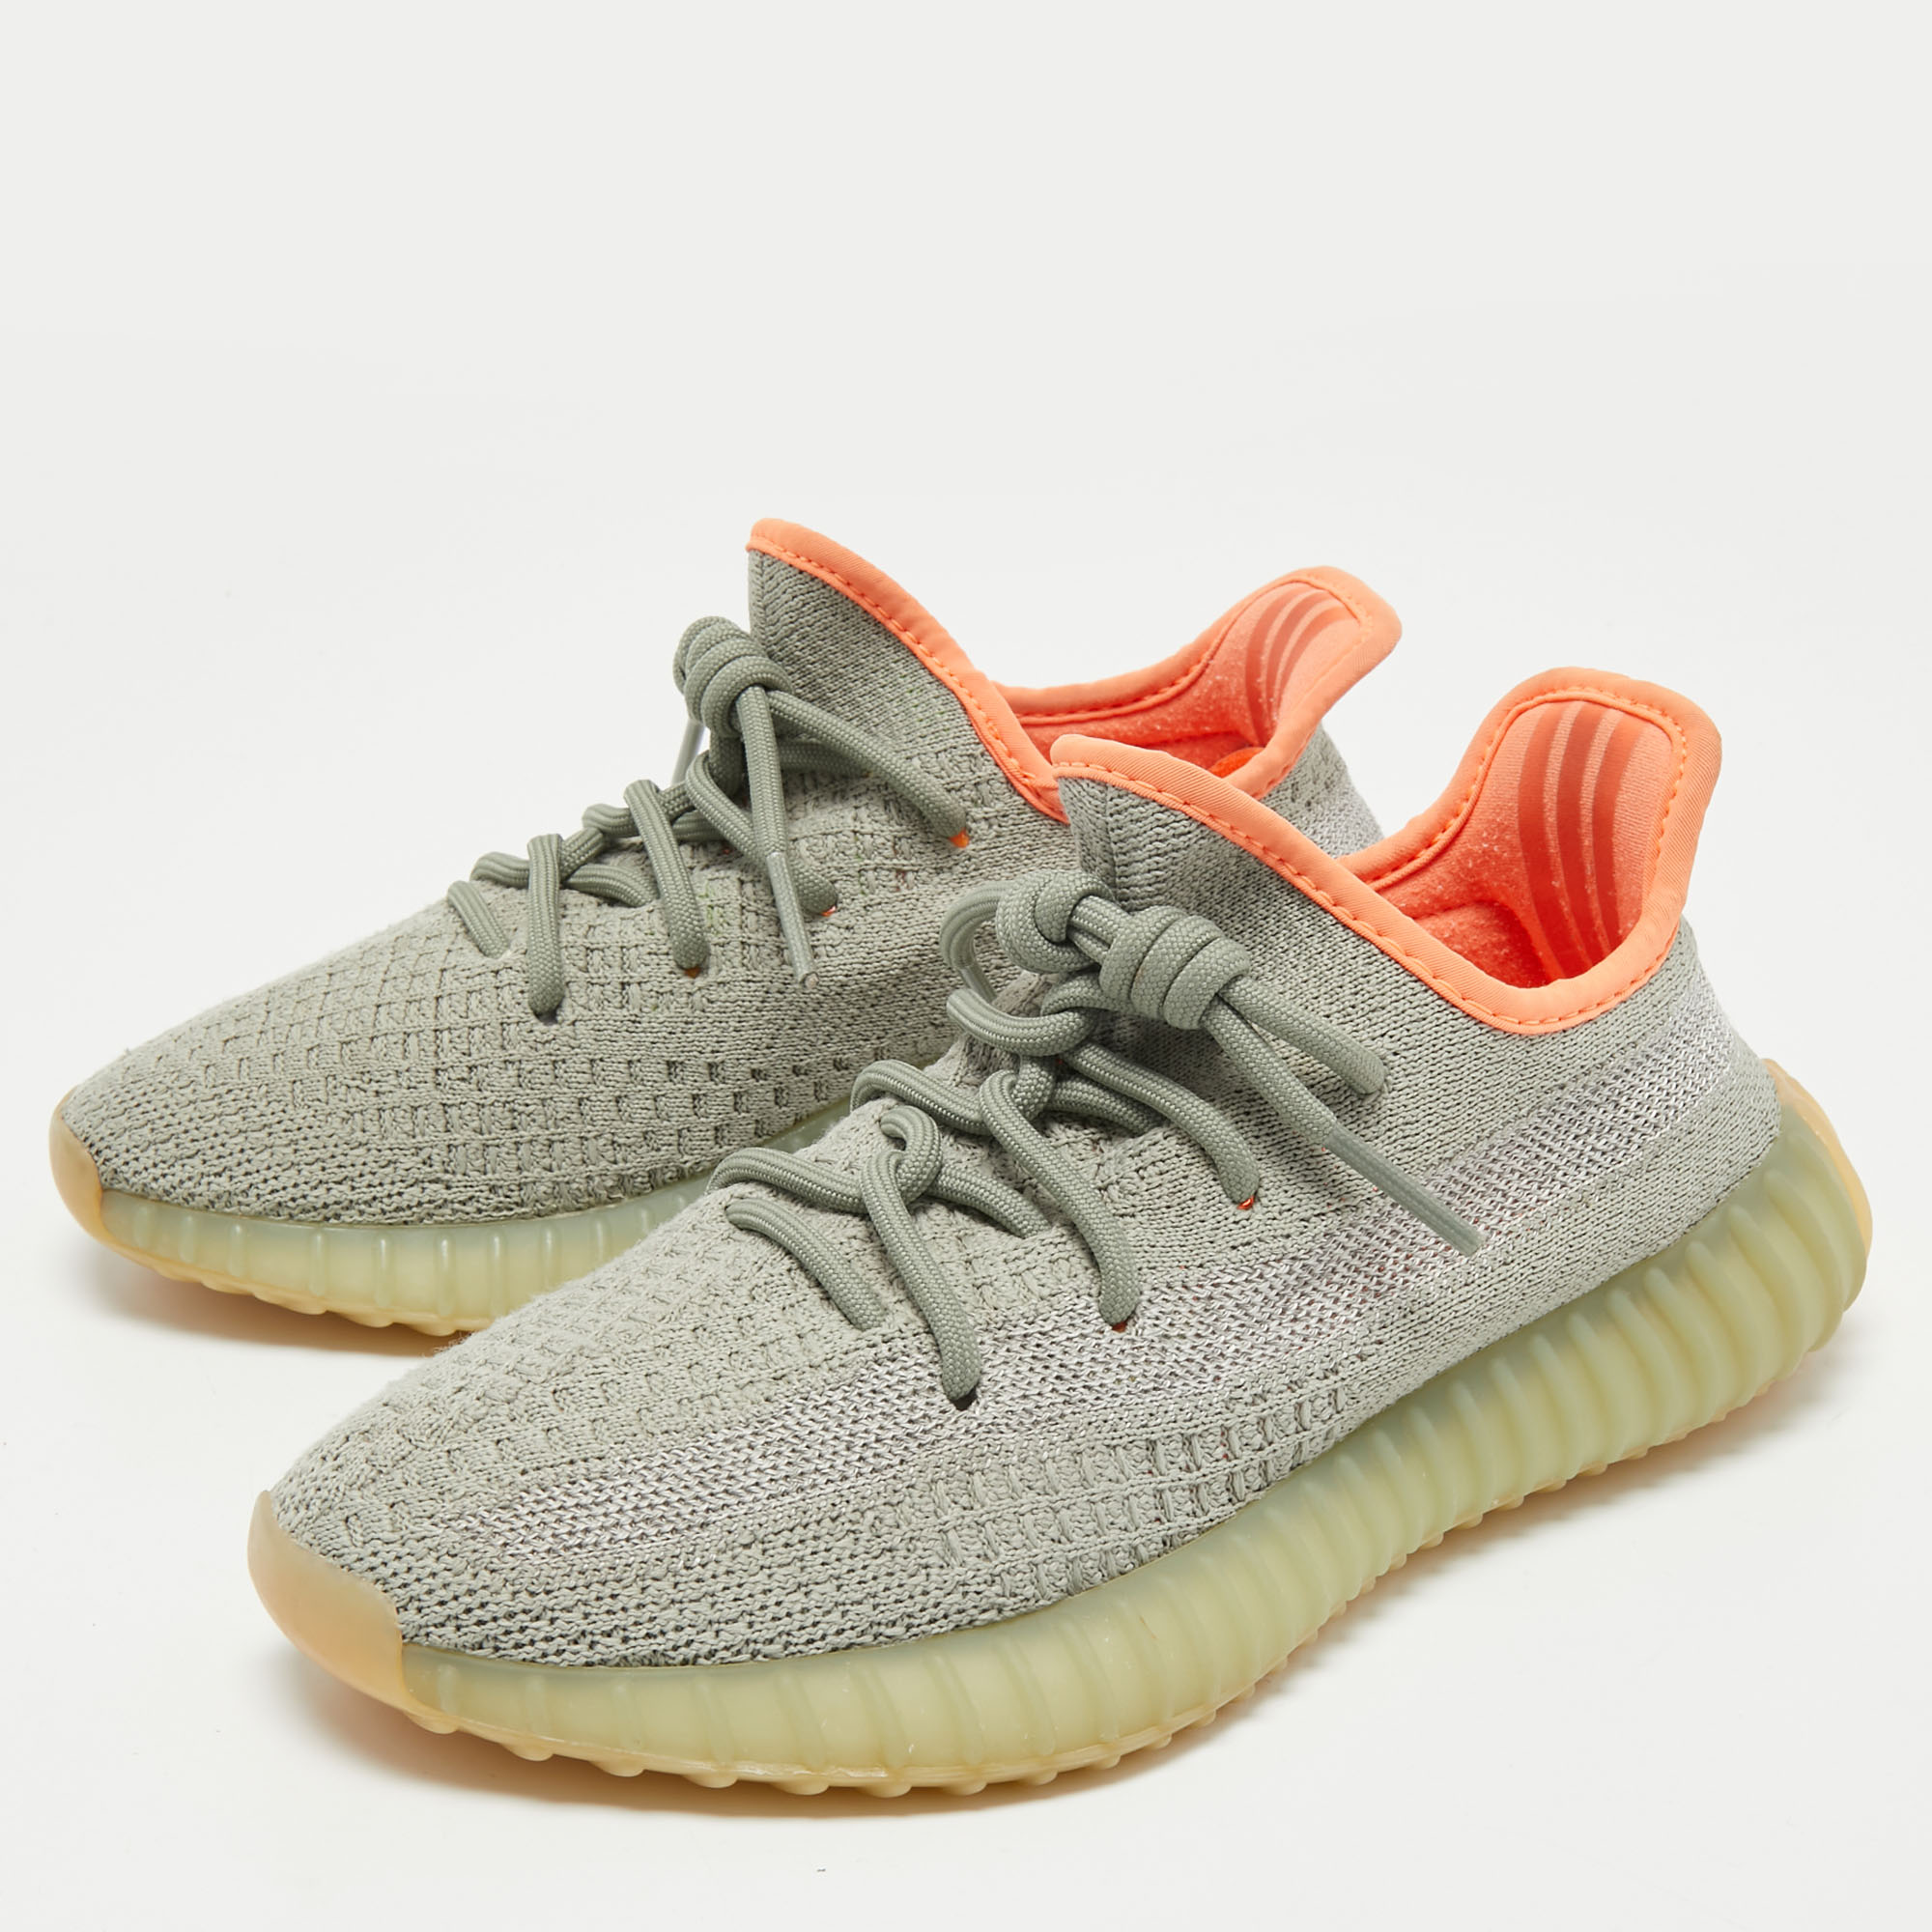 

Yeezy x Adidas Green Knit Fabric Boost 350 V2 Desert Sage Sneakers Size 36 2/3